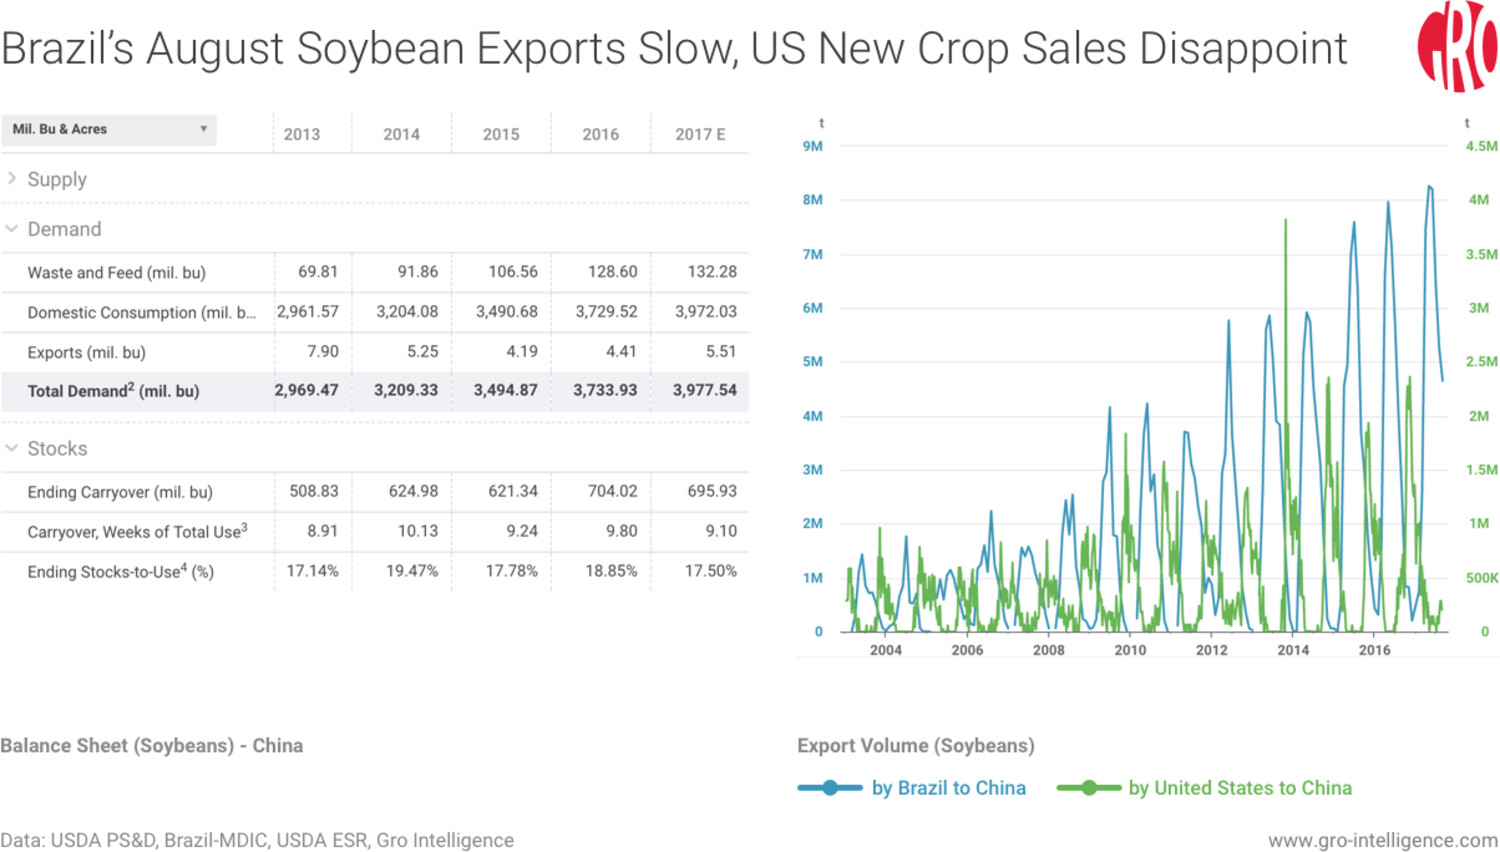 Brazil’s August Soybean Exports Slow, US New Crop Sales Disappoint